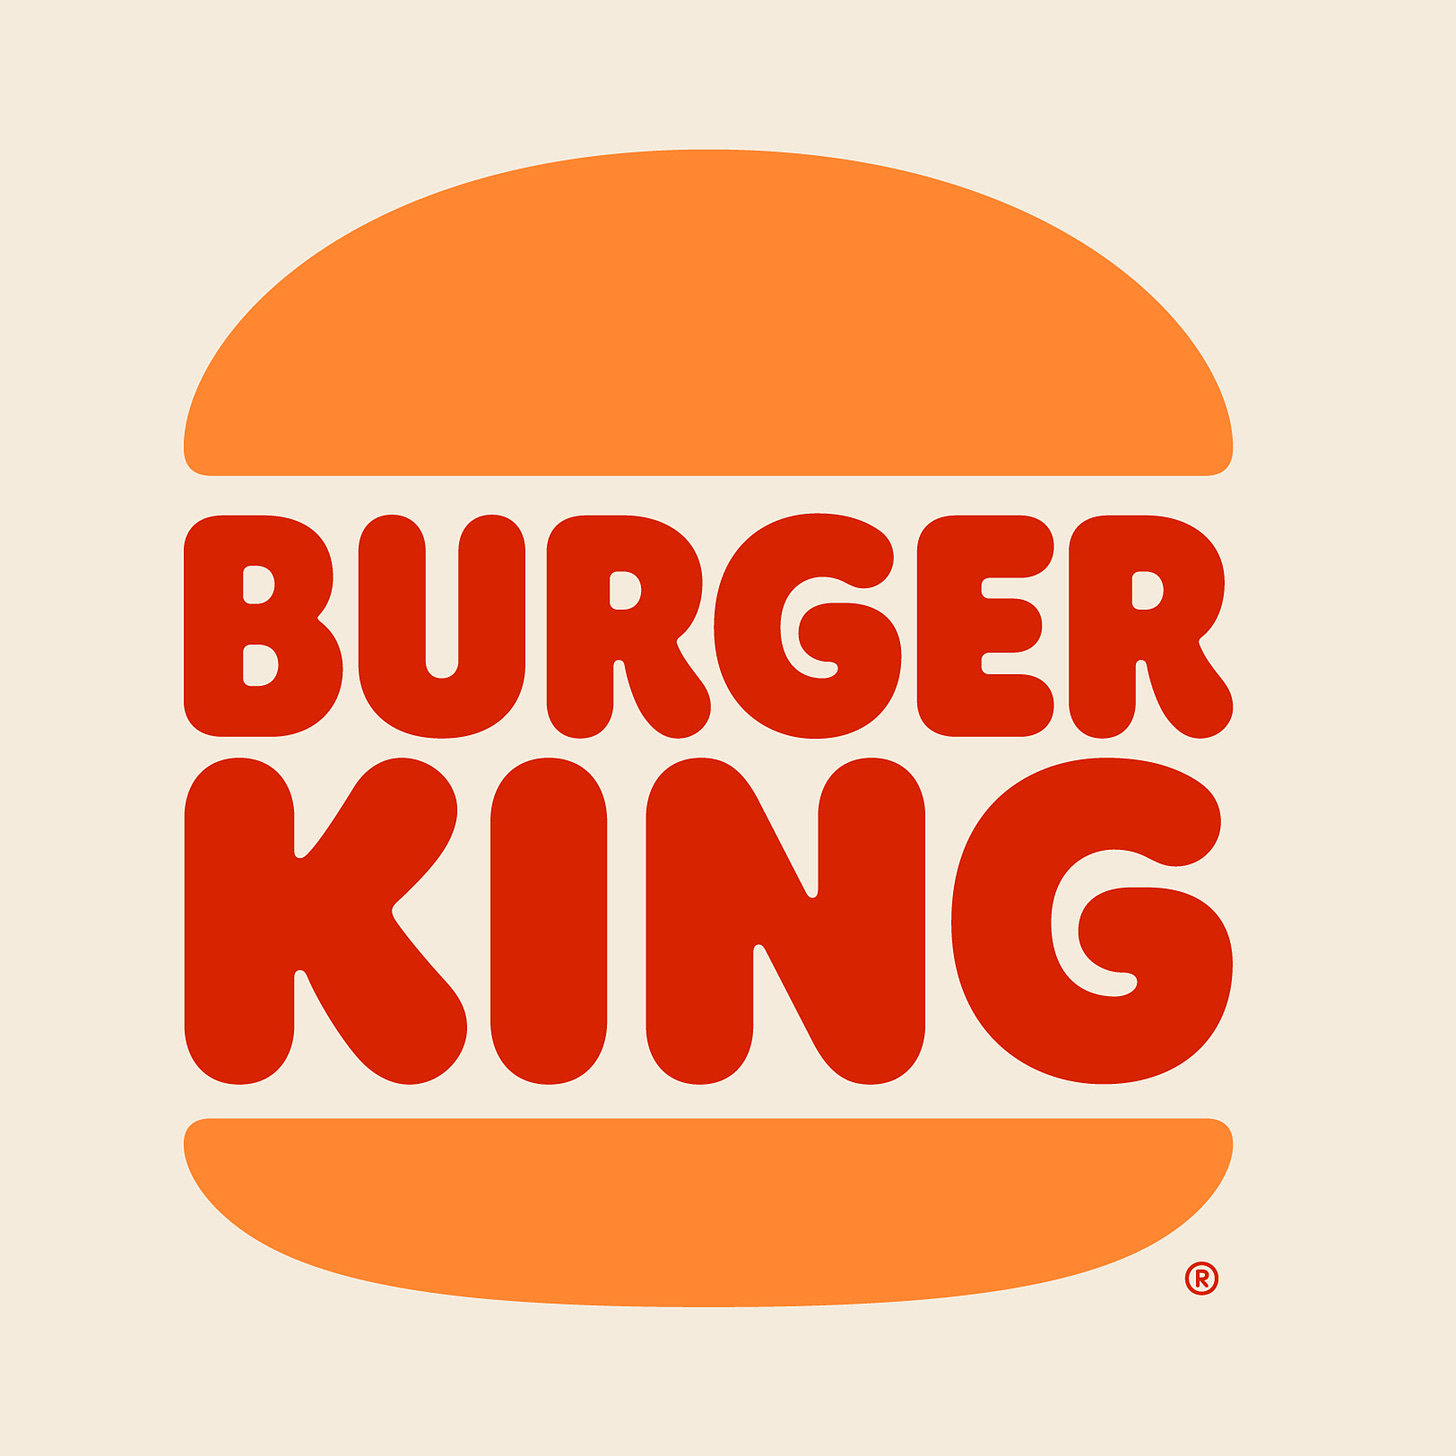 Burger King reveals simplified logo as part of first rebrand in 20 years